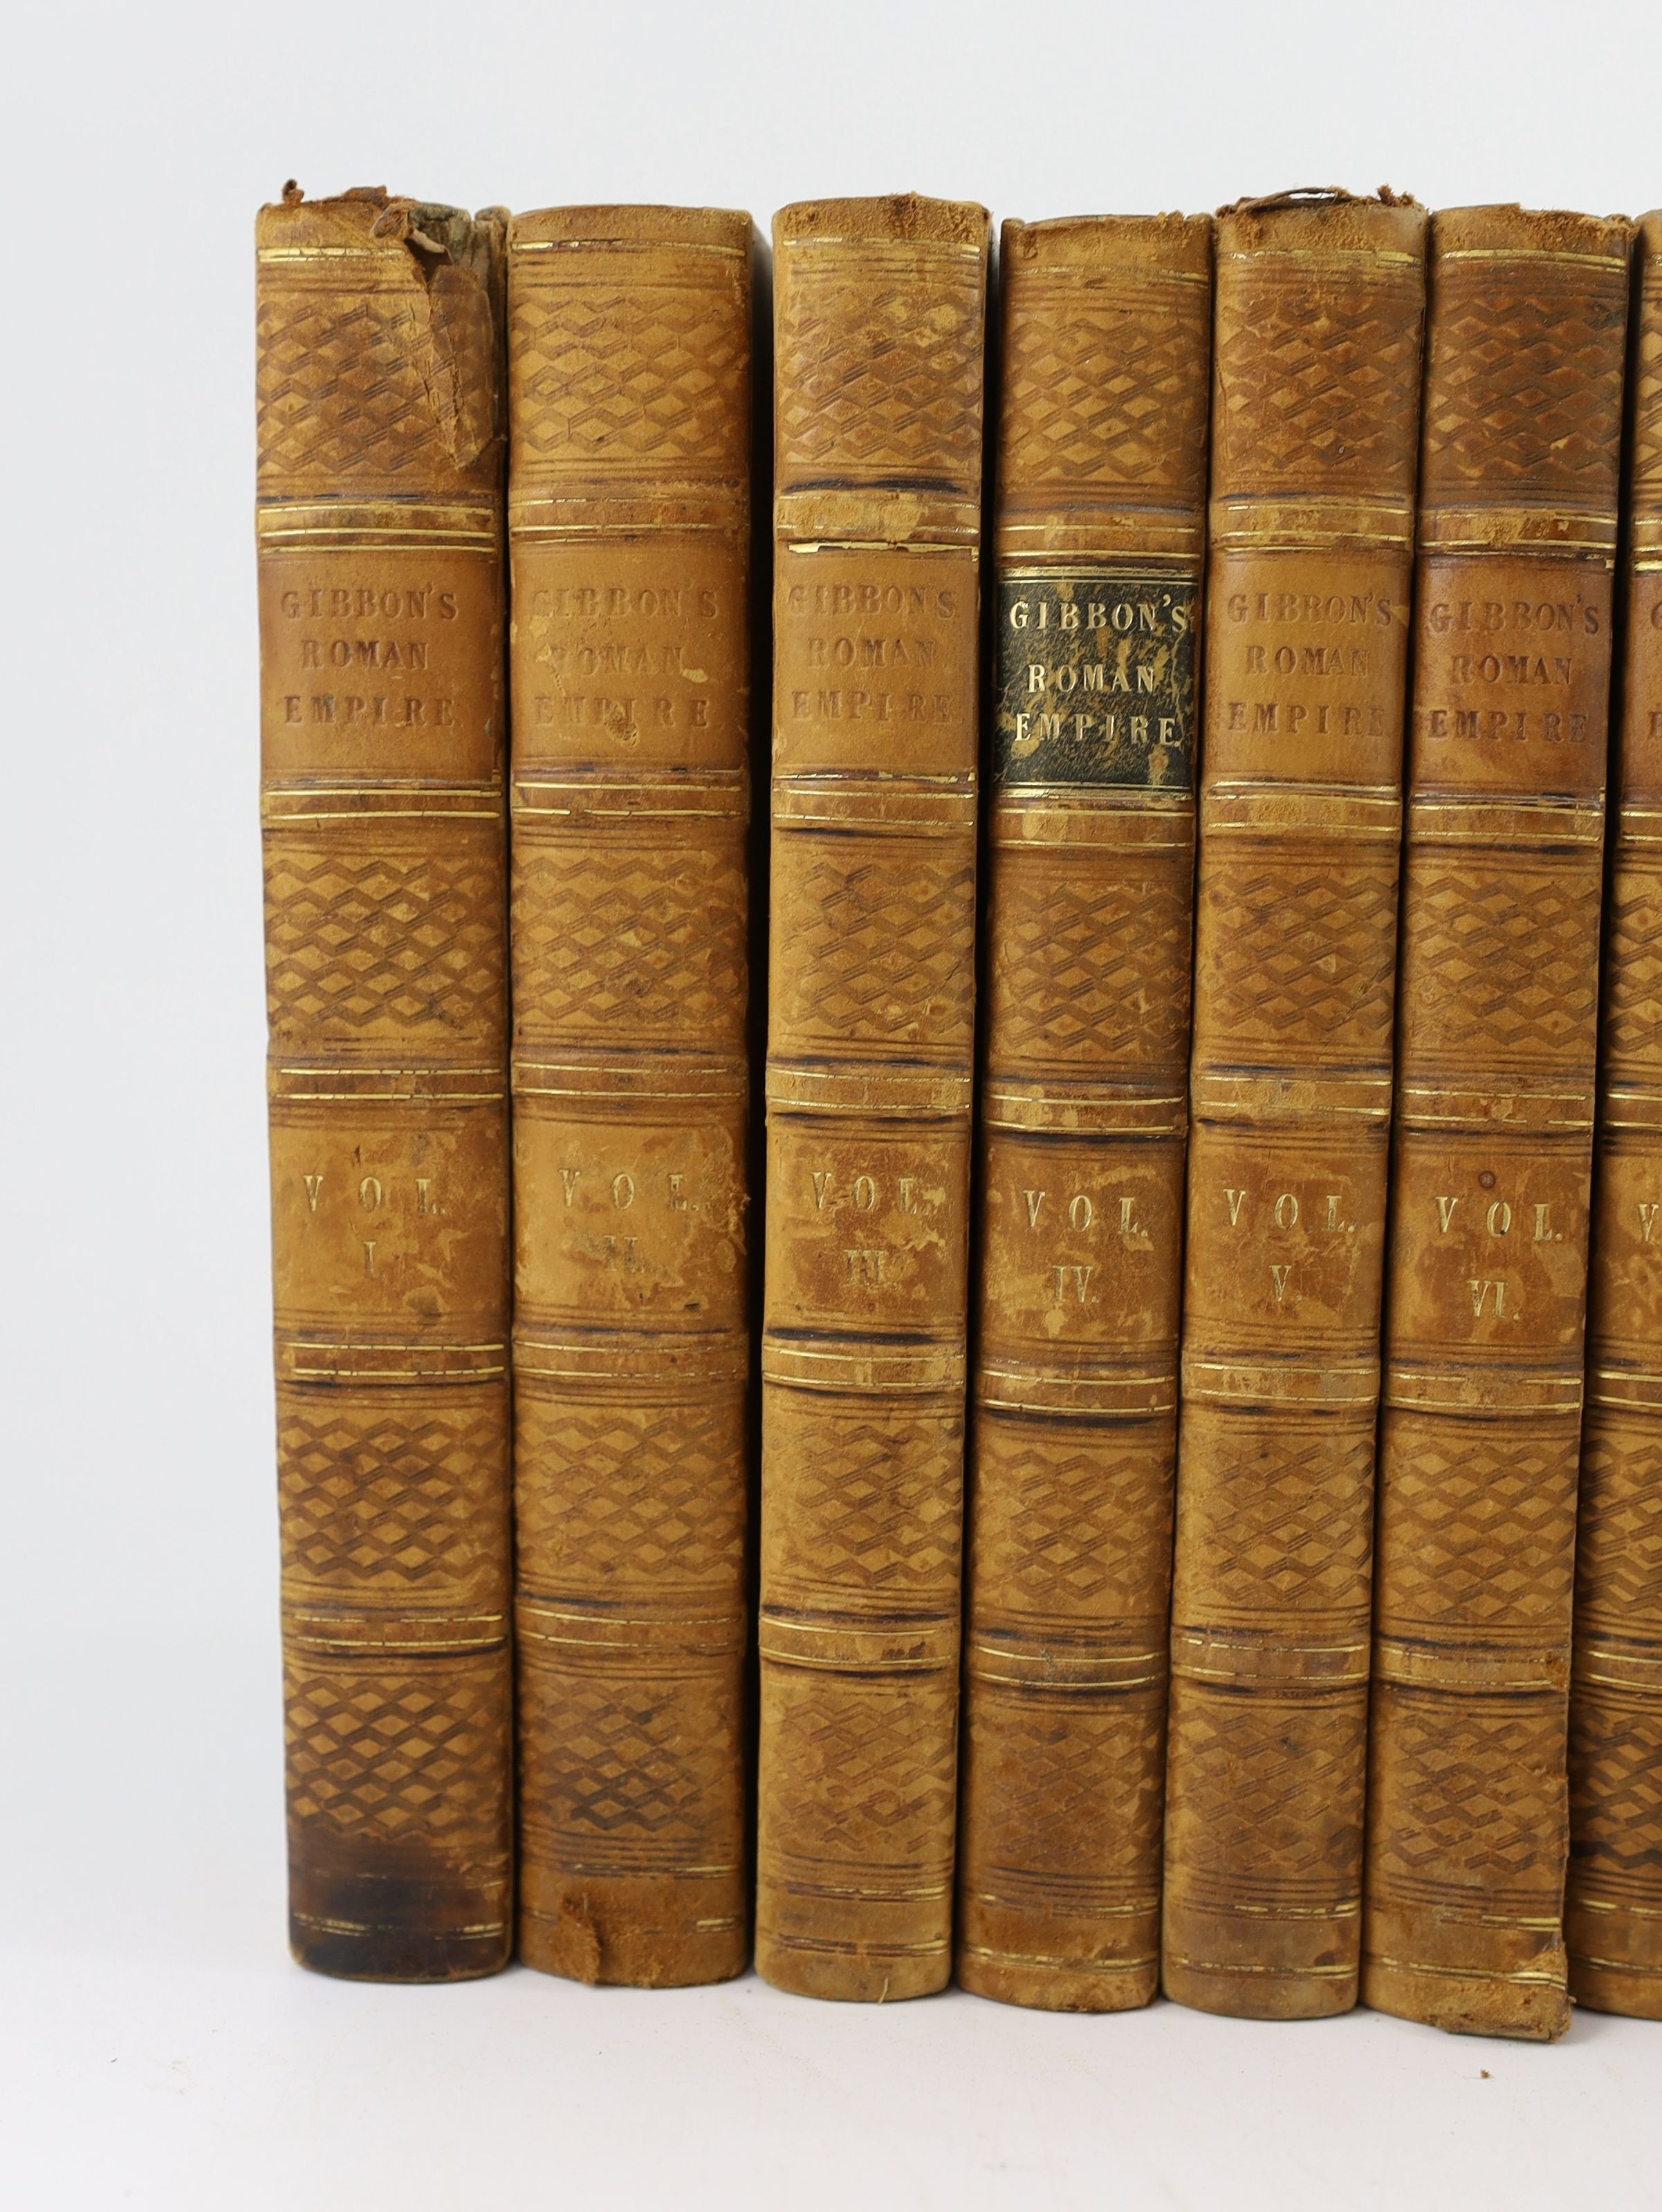 Gibbon, Edward - The History of the Decline and Fall of the Roman Empire, 12 vols, 8vo, half calf, with portrait frontispiece and 2 folding maps, frontis and titles browned, maps spotted, lacking most titling labels, Lon